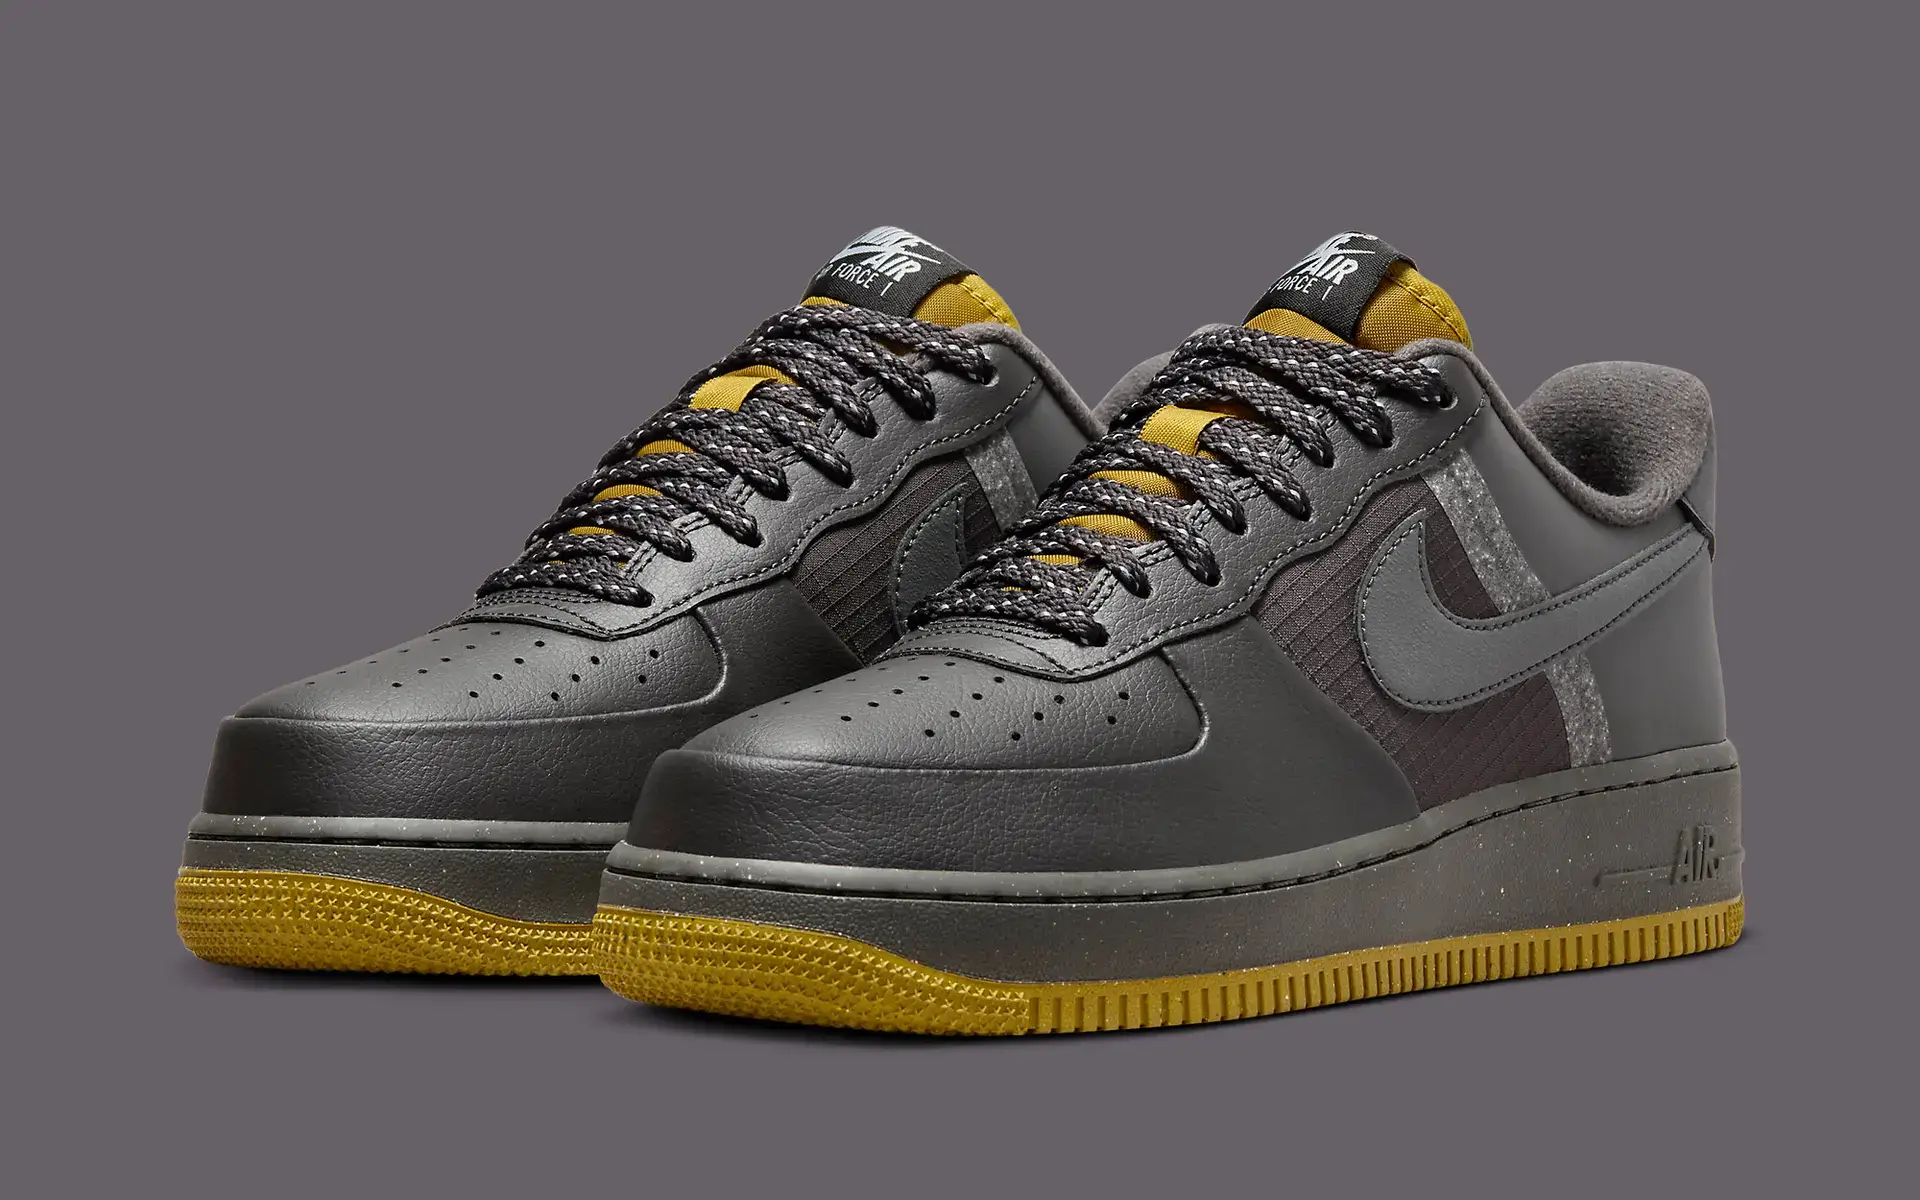 Upcoming New Nike Winterize the Air Force 1 Low 